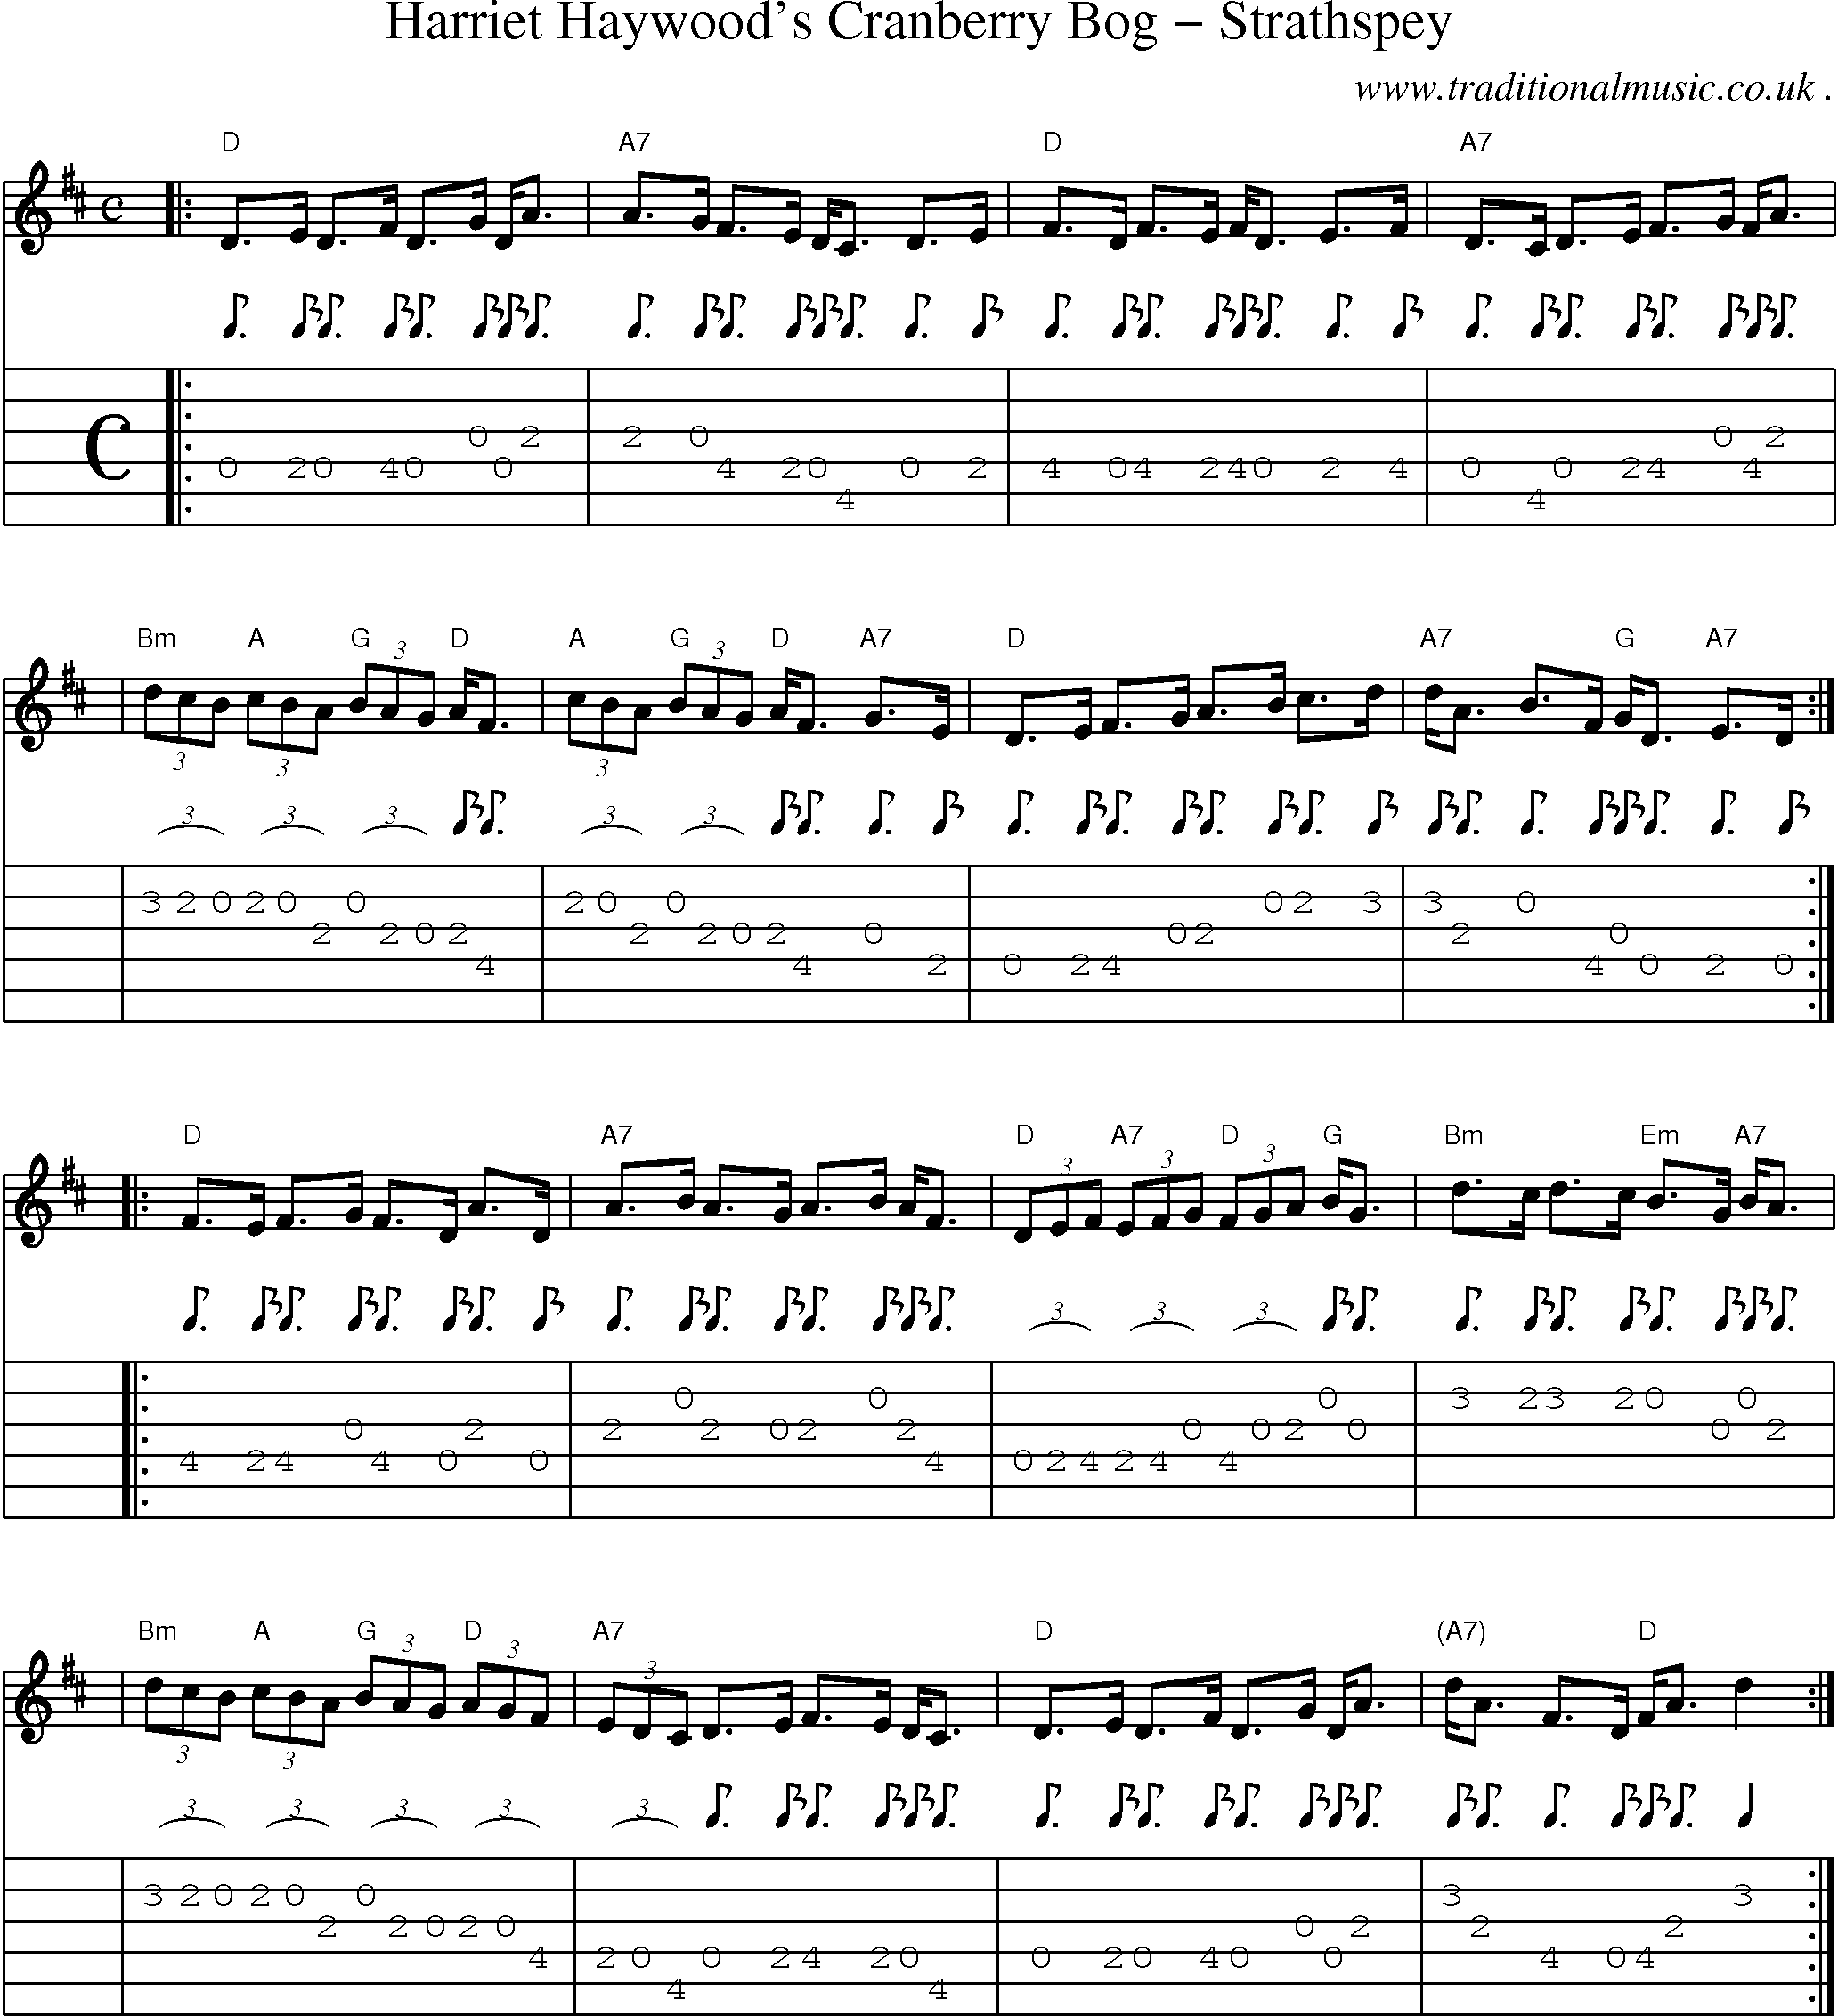 Sheet-music  score, Chords and Guitar Tabs for Harriet Haywoods Cranberry Bog Strathspey